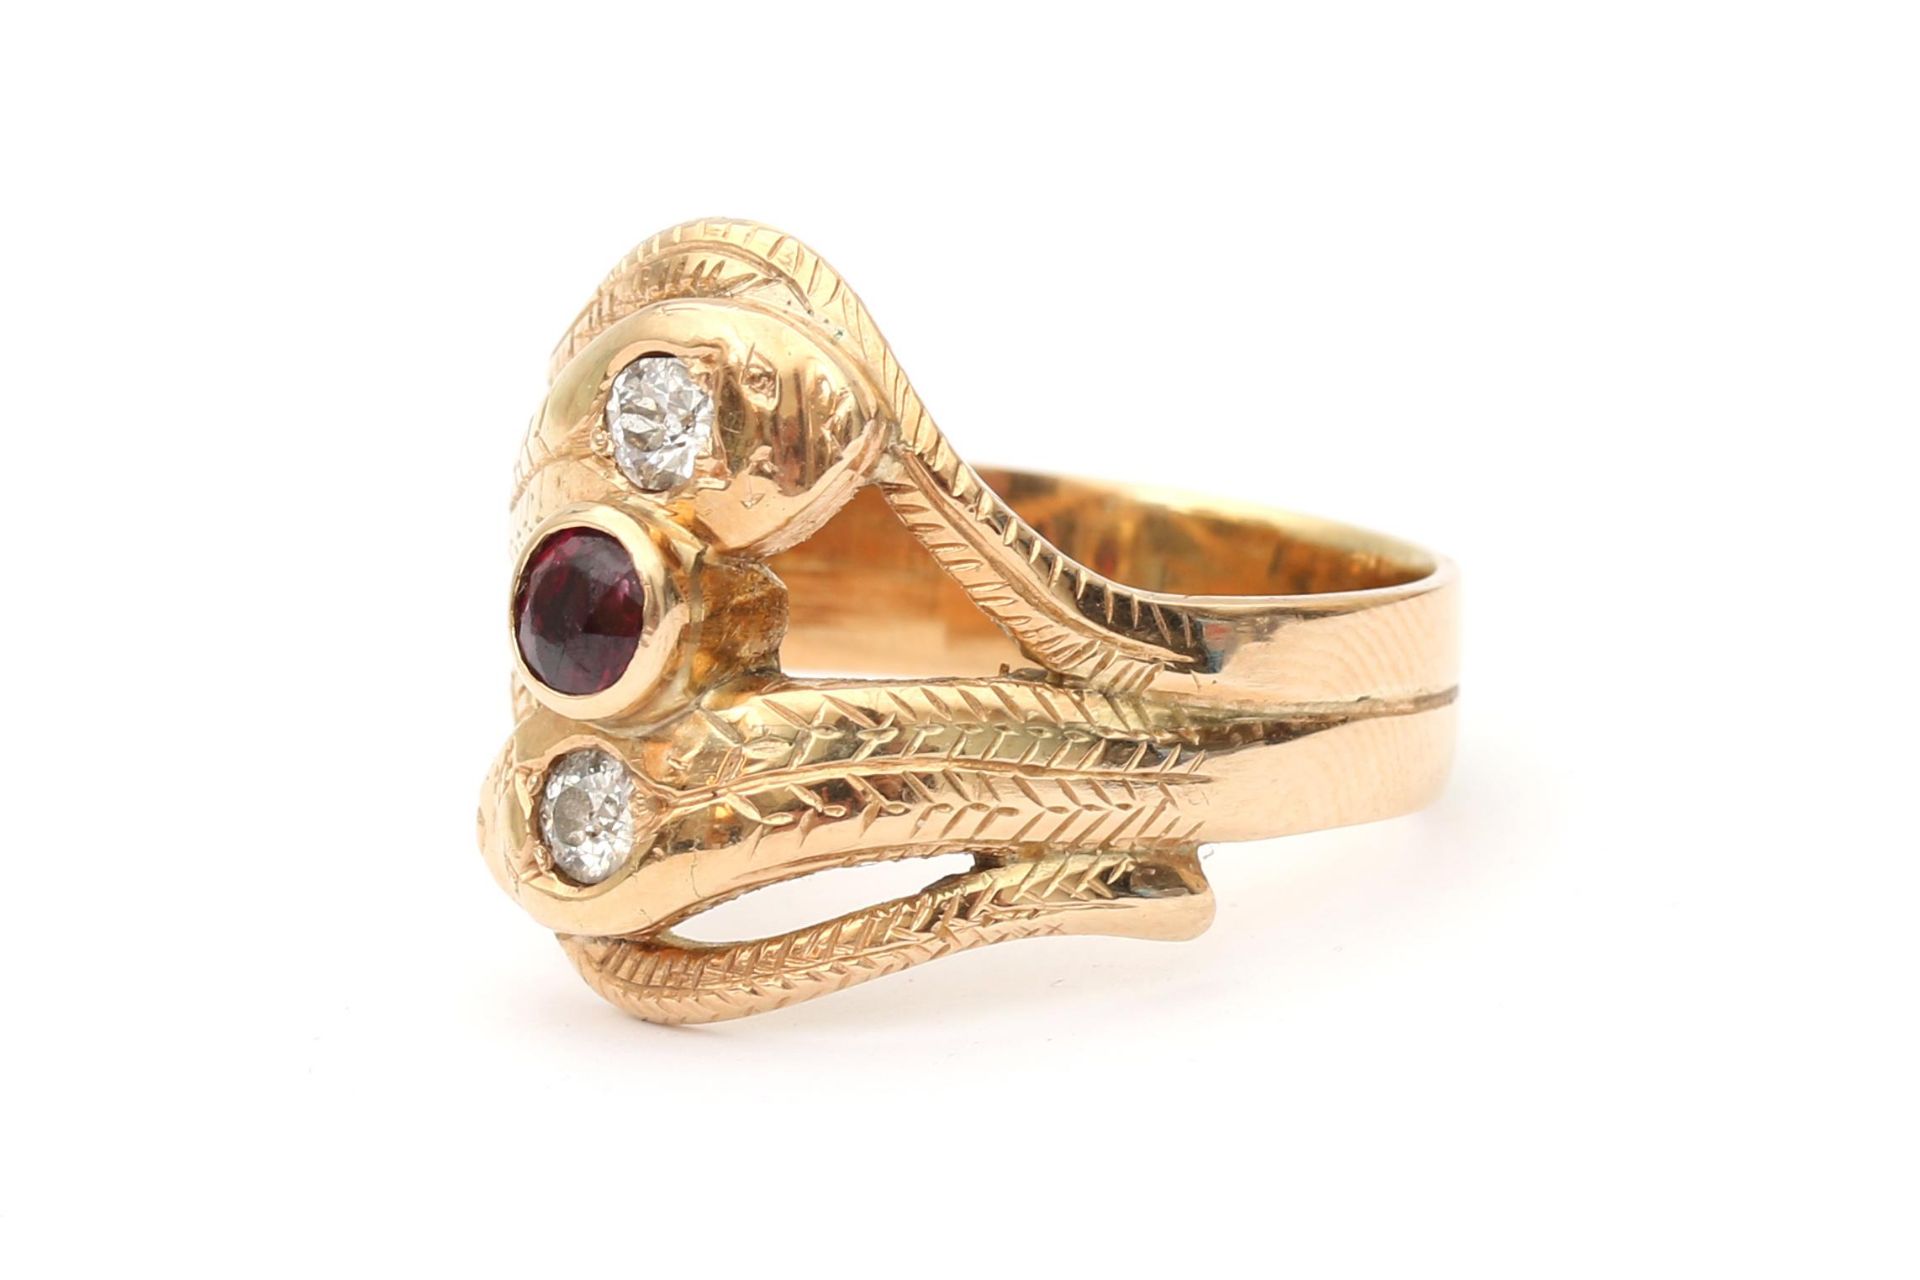 A 14 karat gold gold diamond and ruby snake ring - Image 2 of 2